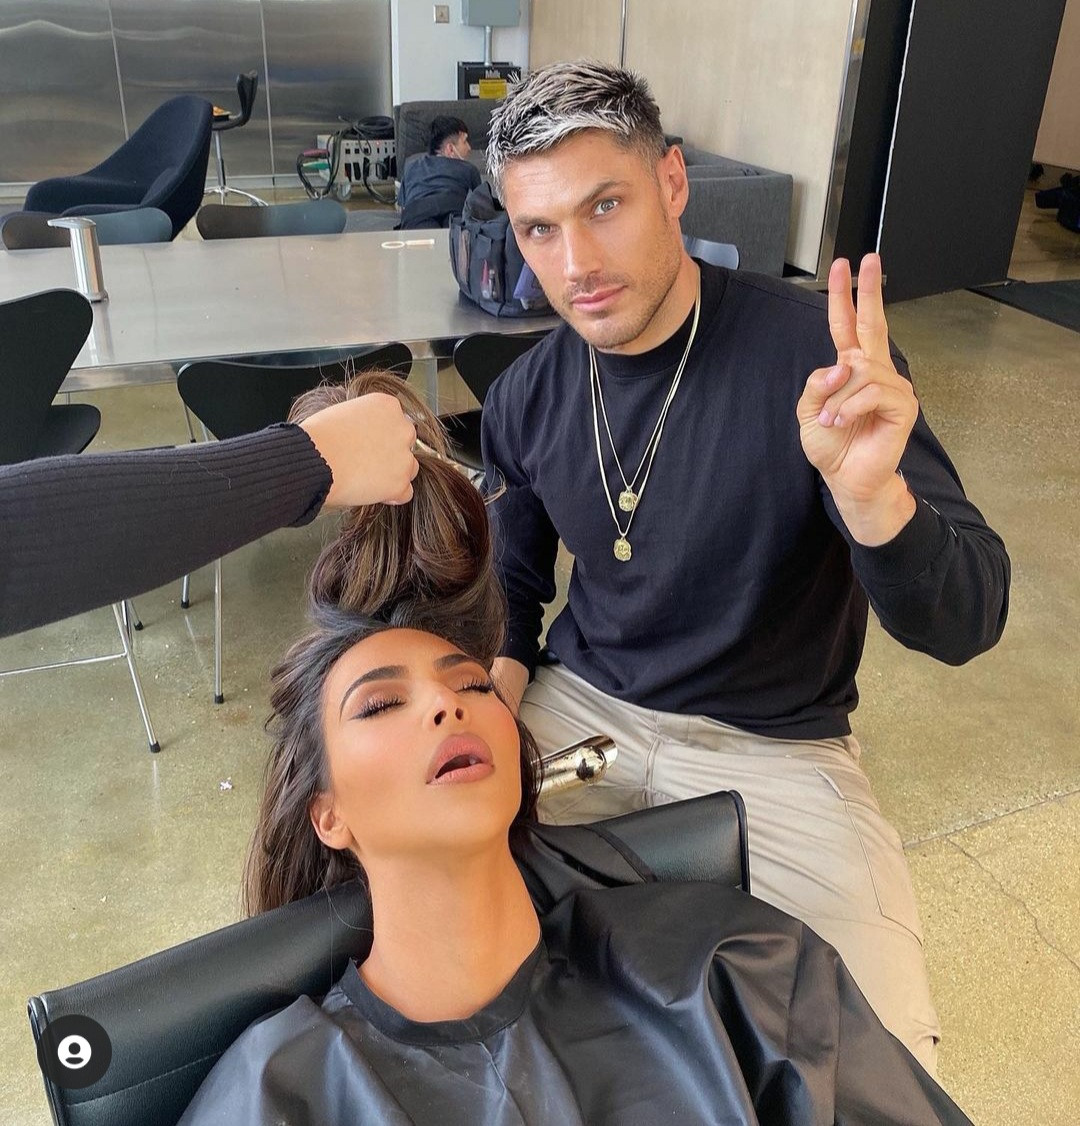 Hairdresser shares photo of Kim Kardashian to troll her after she fell asleep in his glam chair 